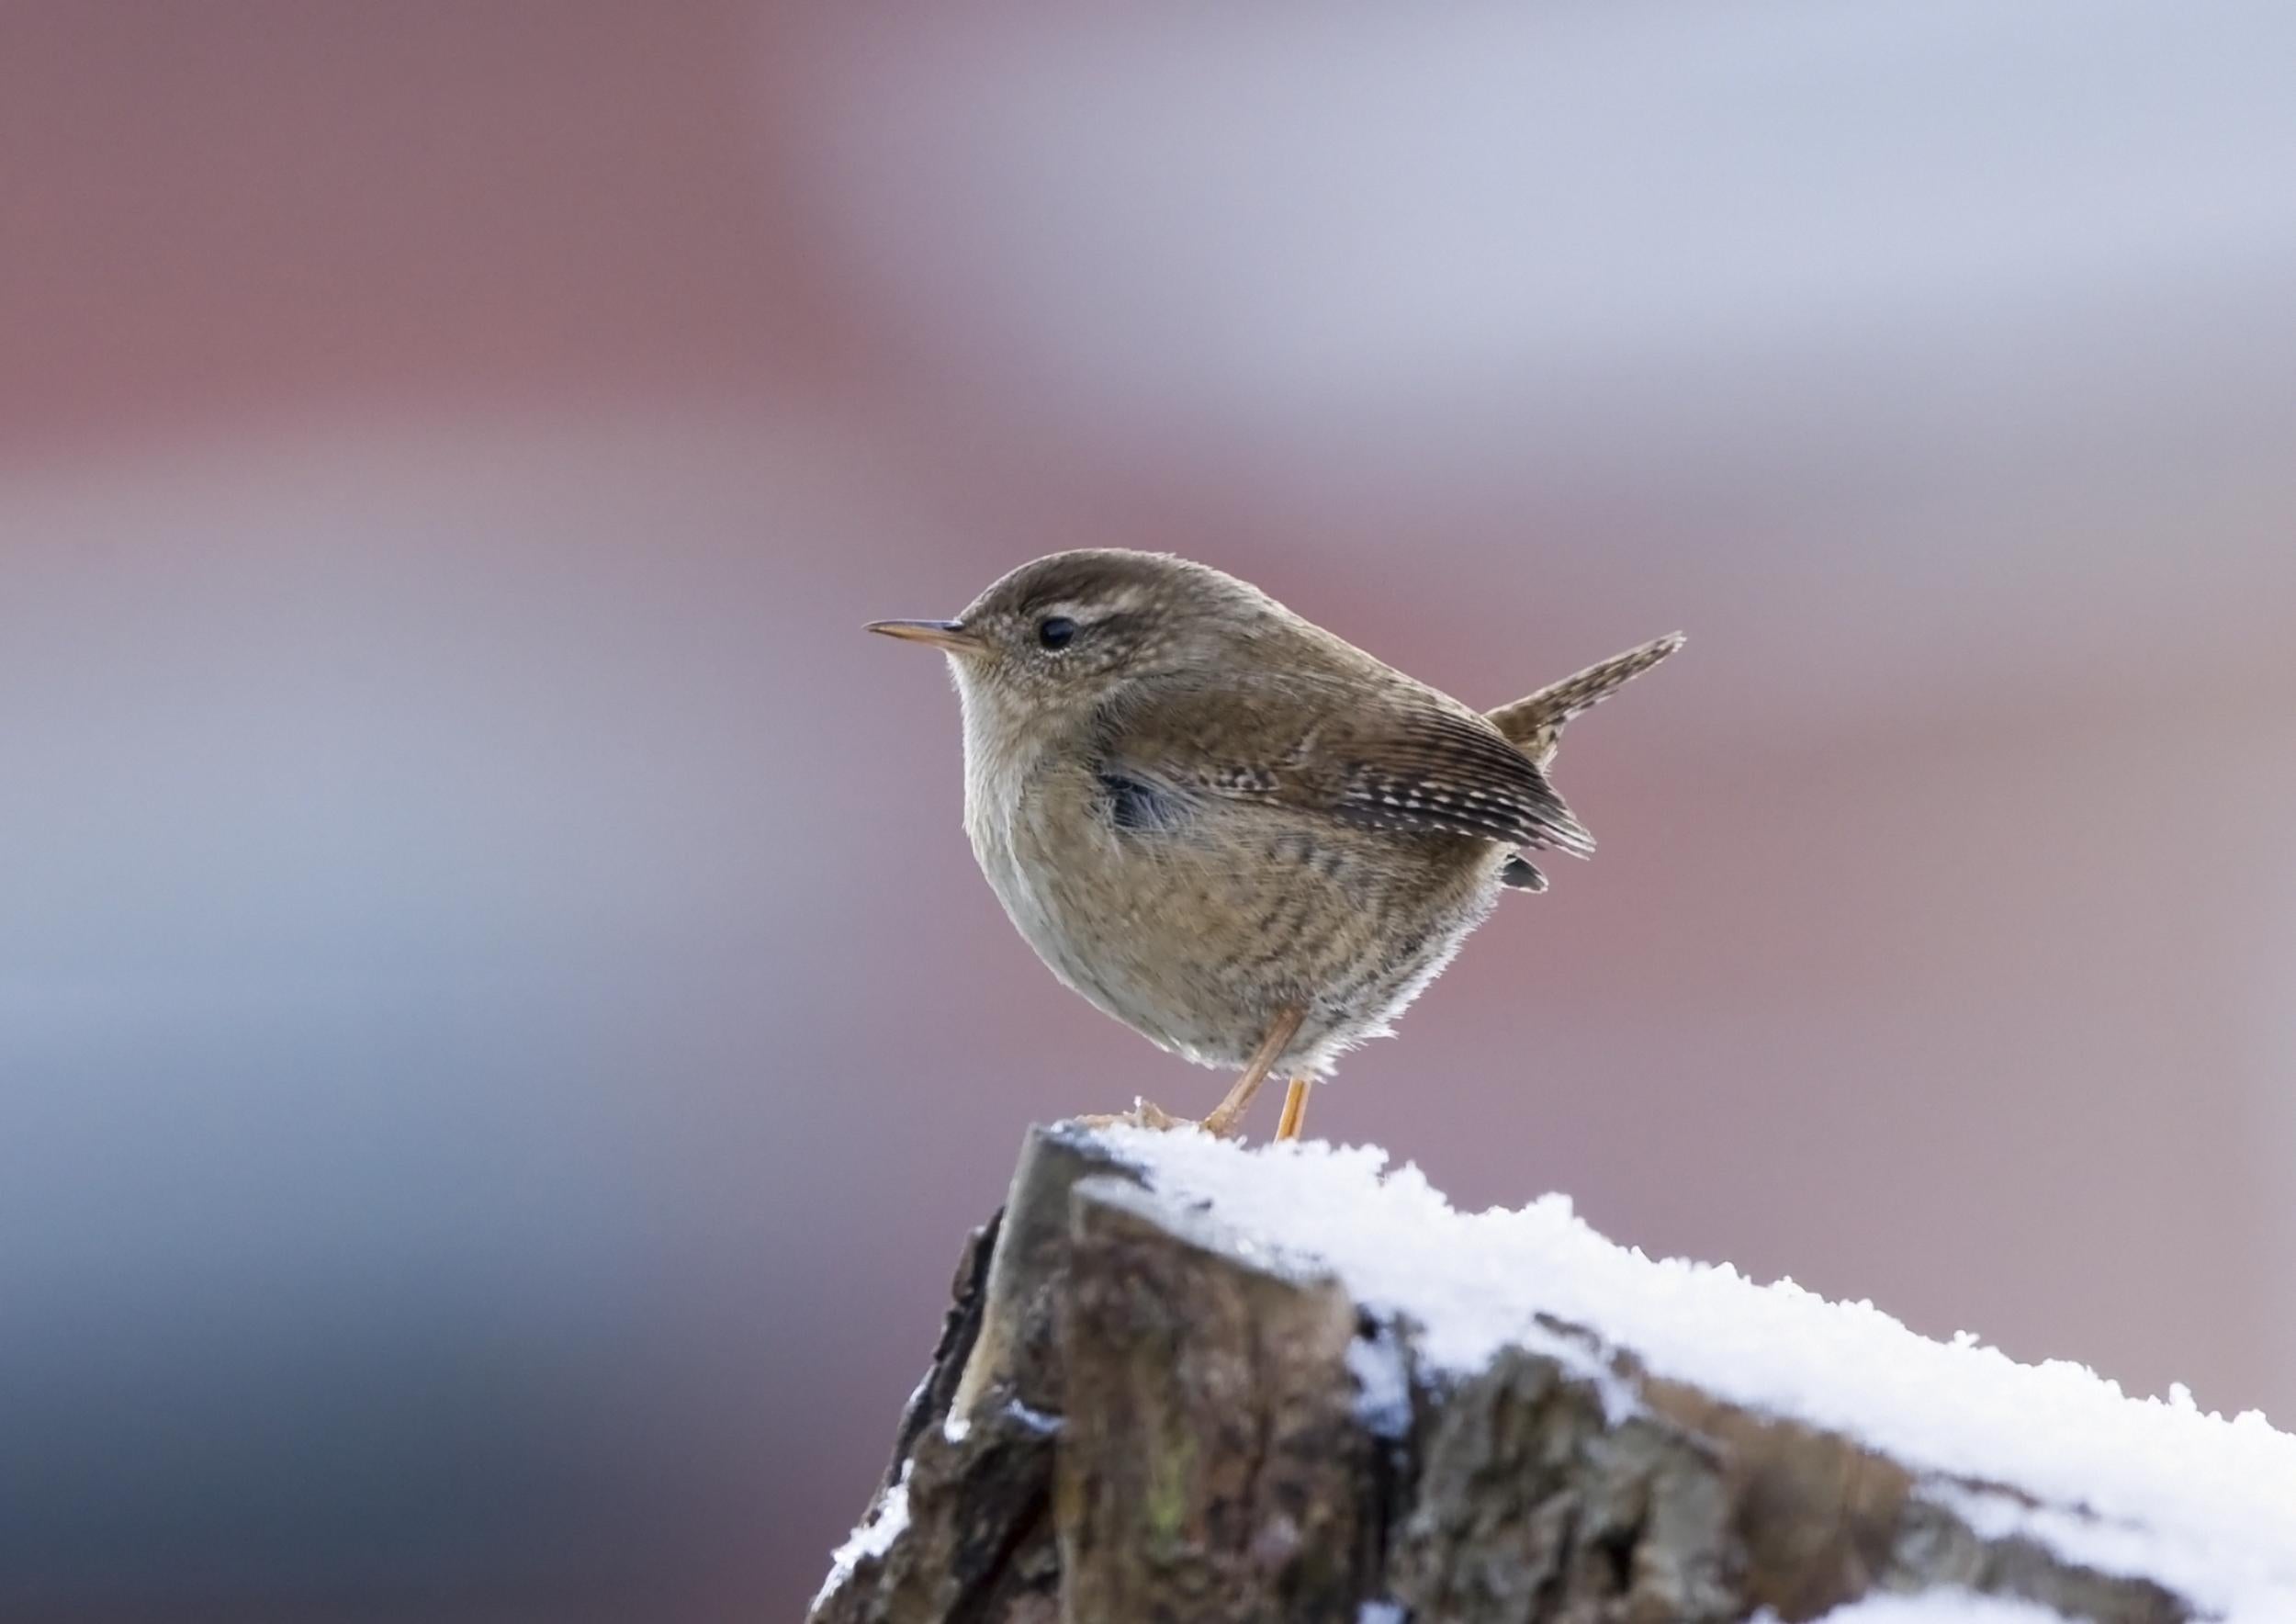 Wrens, one of the smallest birds, were targeted